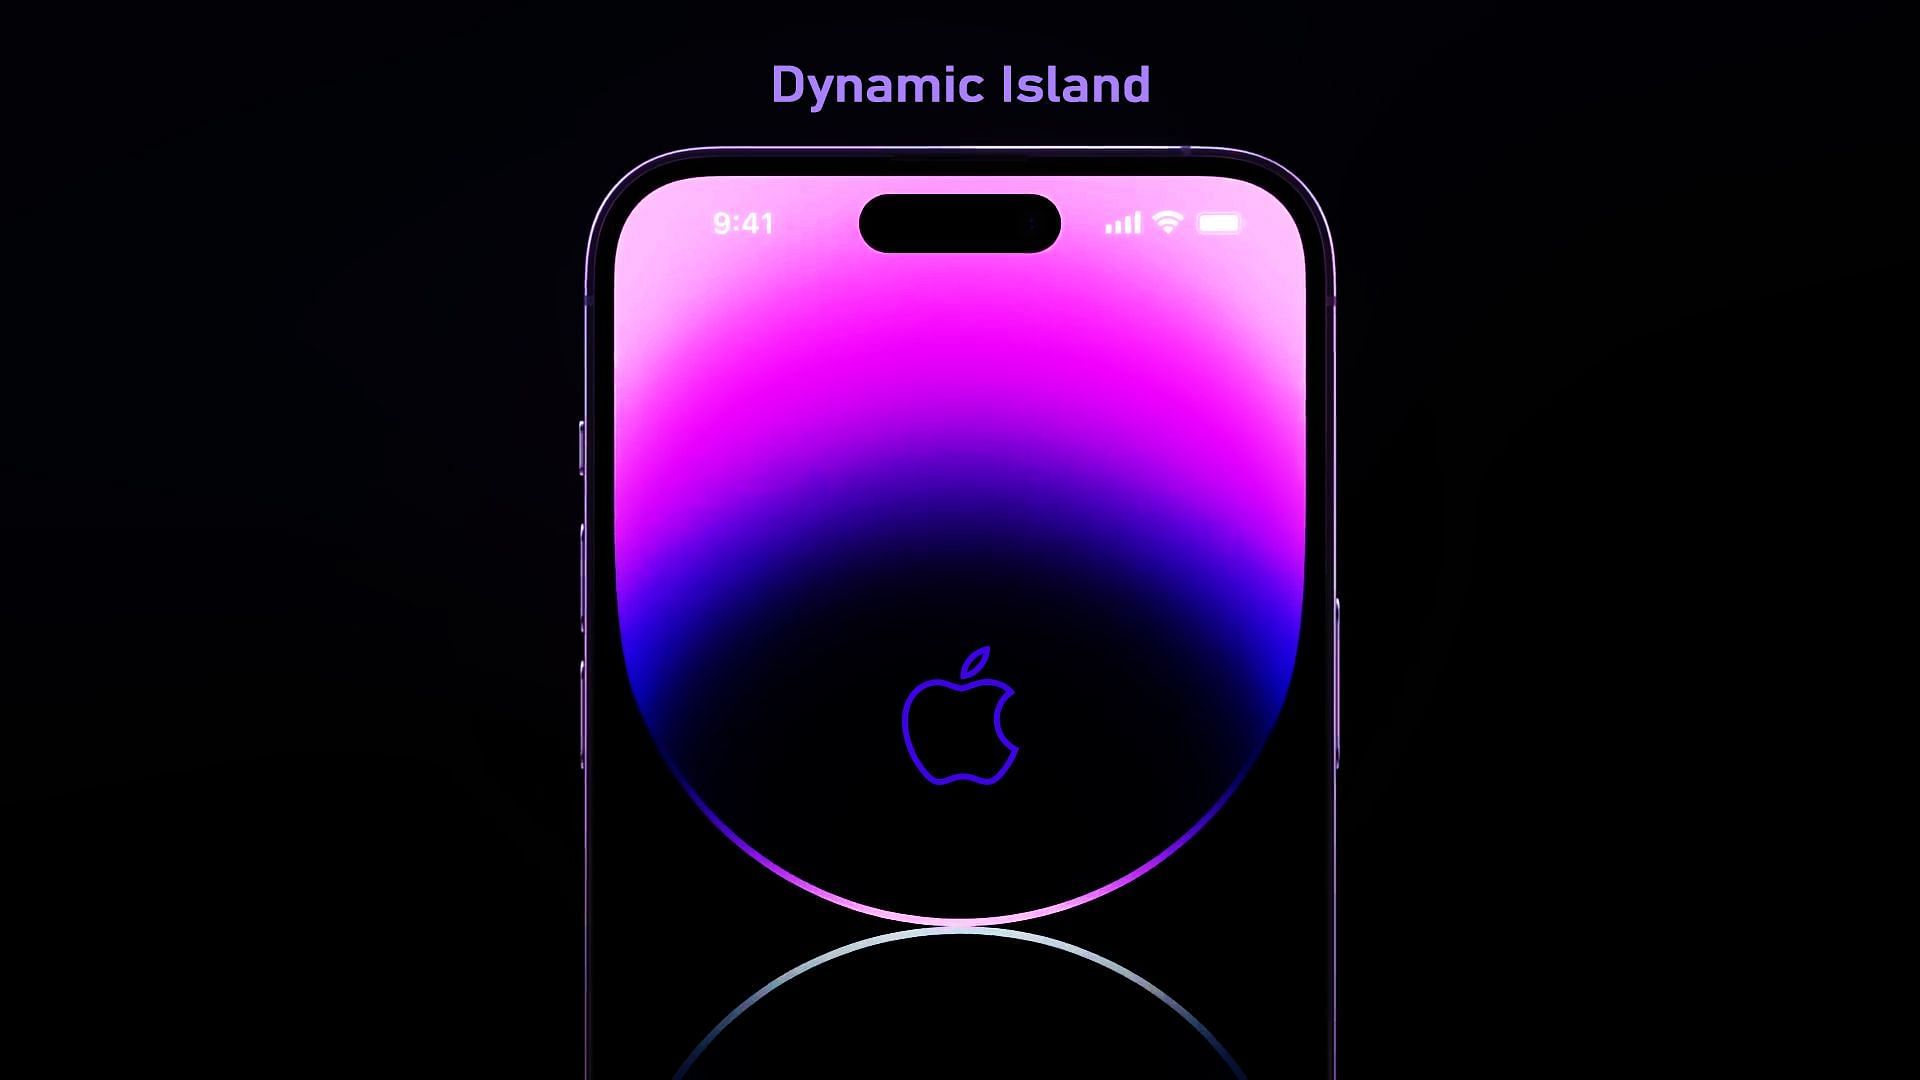 Apple transformed Dynamic Island into a fully dynamic part of iPhone